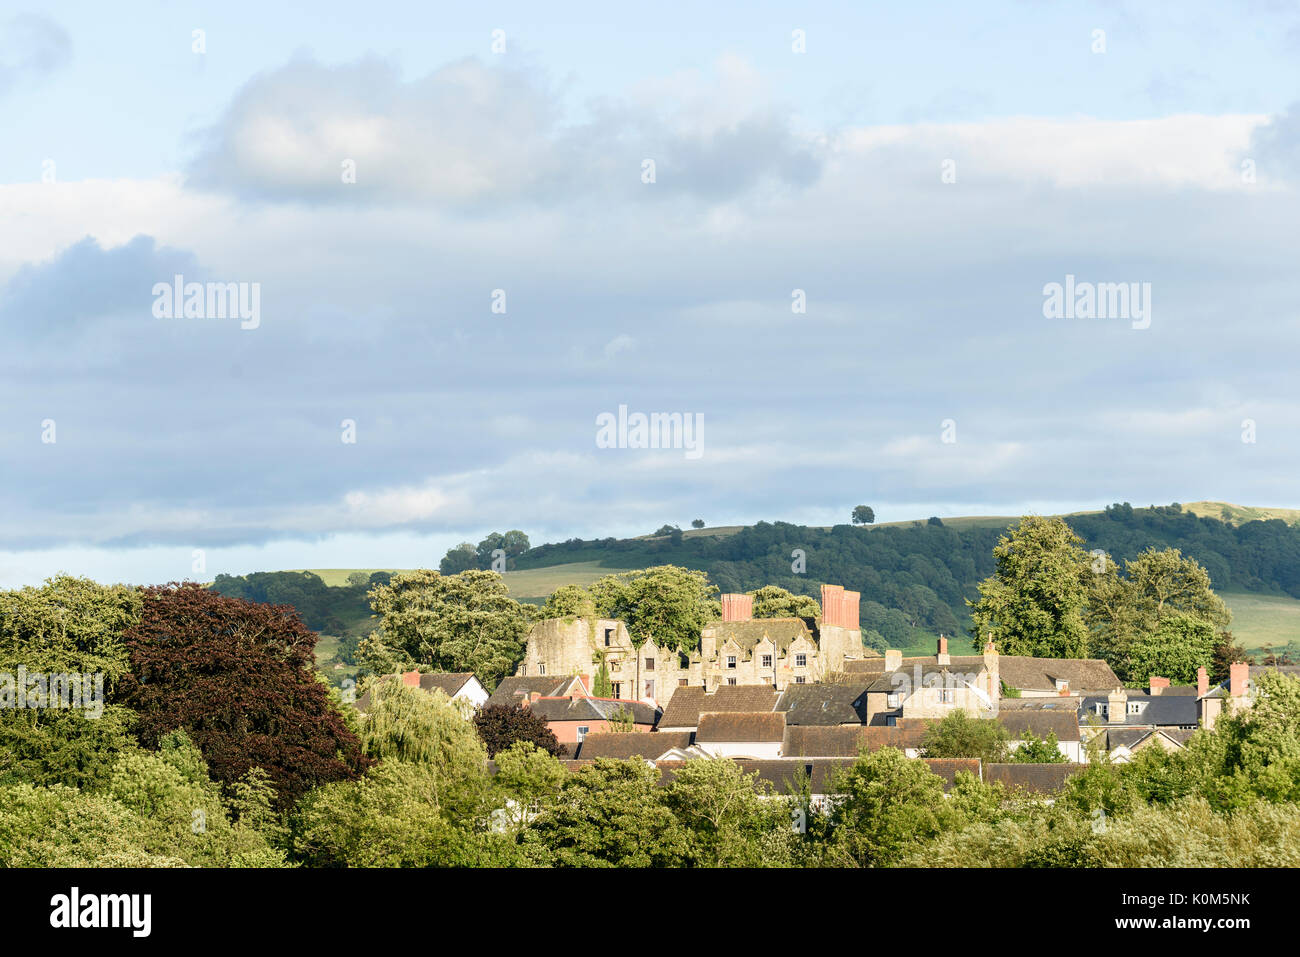 Abandoned castle and houses at Hay on Wye, a small town on the border of England and Wales. Stock Photo